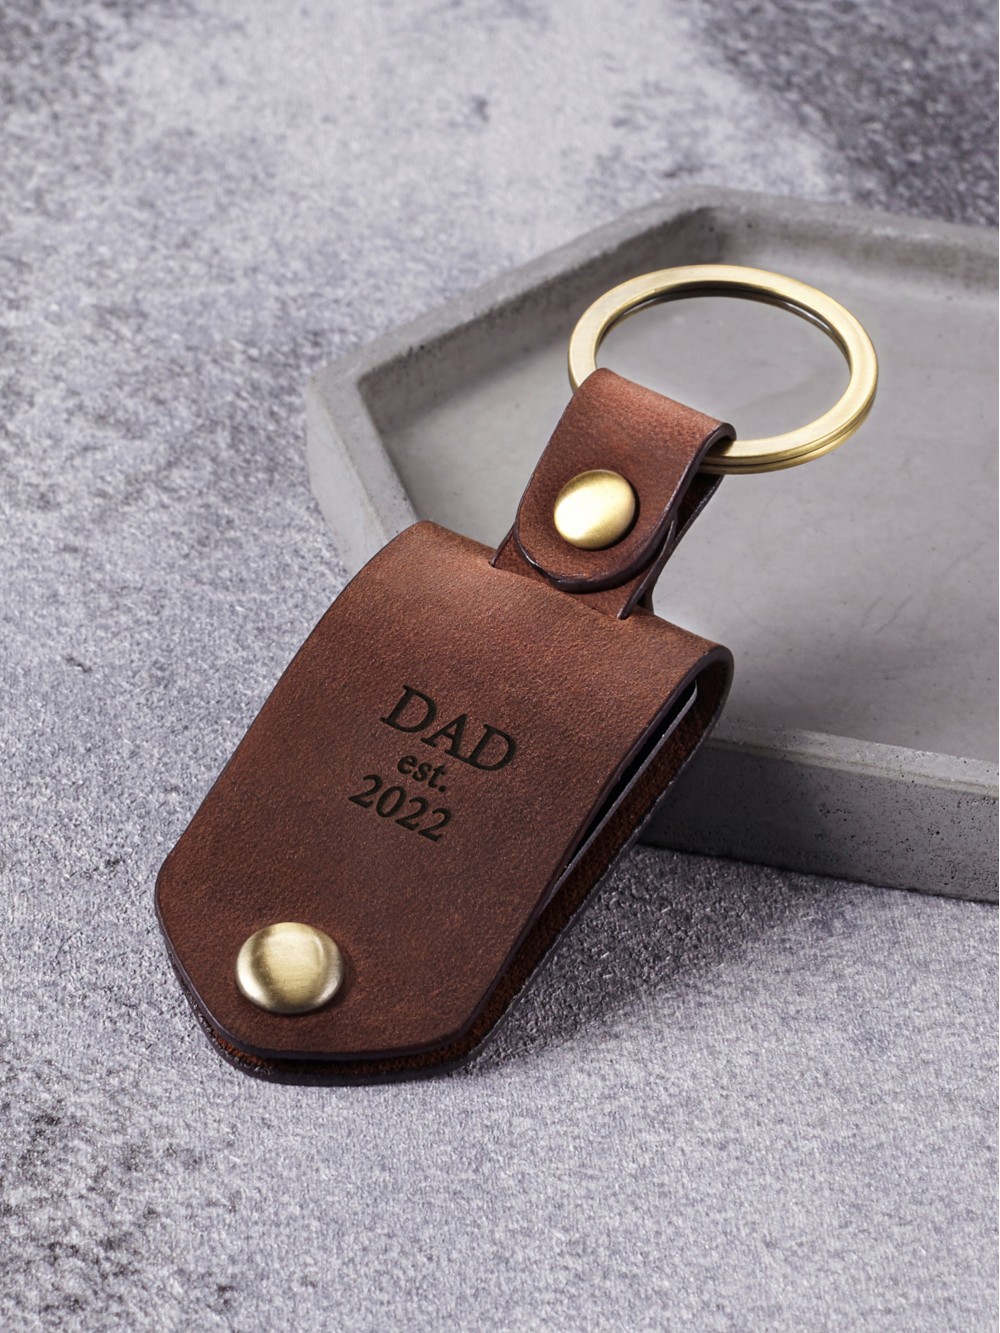 Dad EST Aluminum Keychain with Leather Case for New Dad